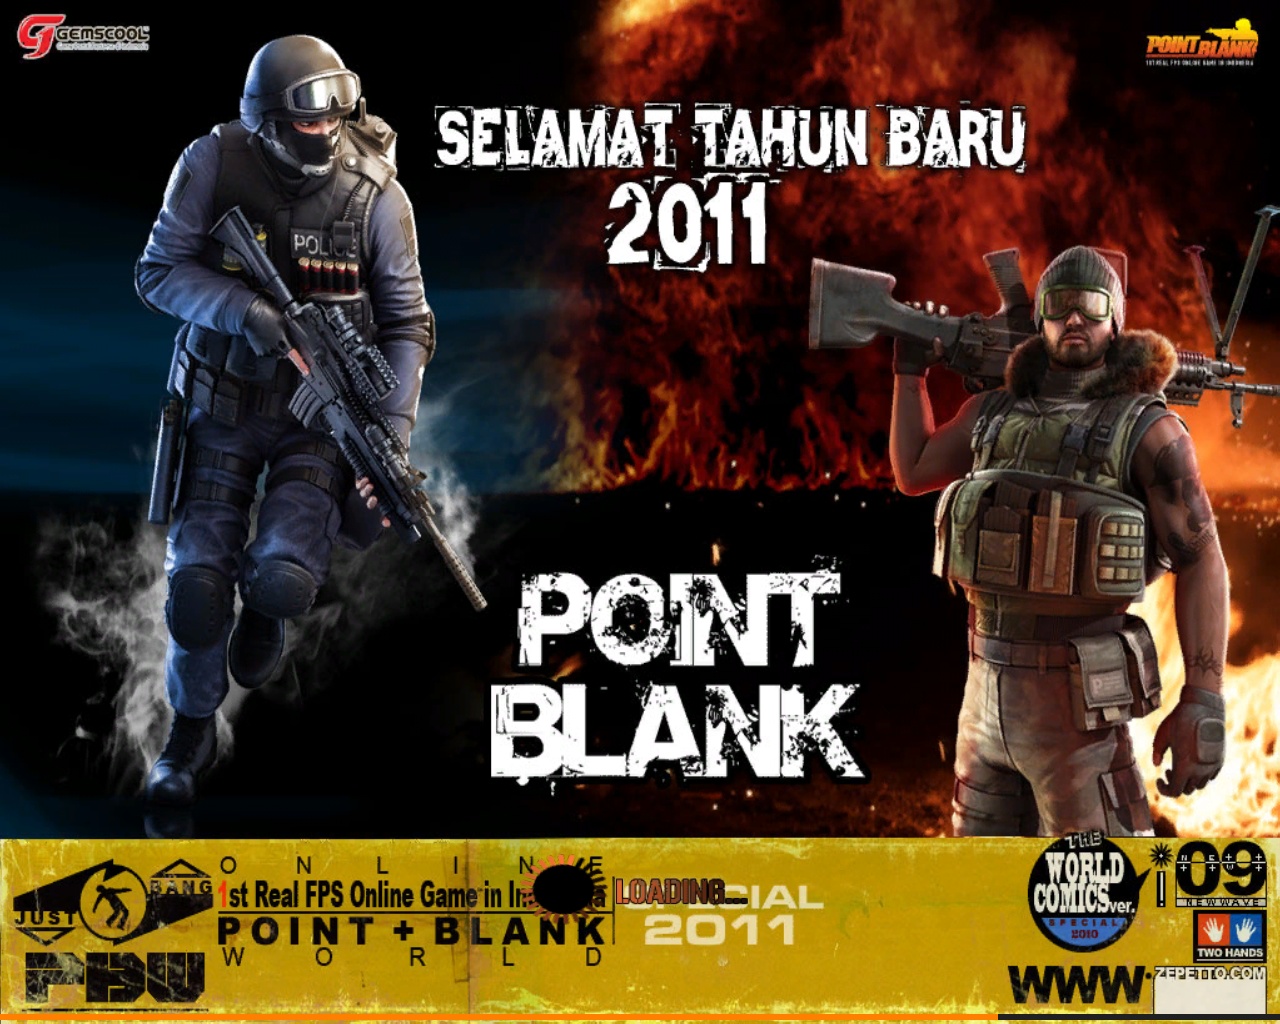 ... Online. POINT BLANK. ON LINE GAME SHOOTERS DOWNLOAD YULGANG ONLINE